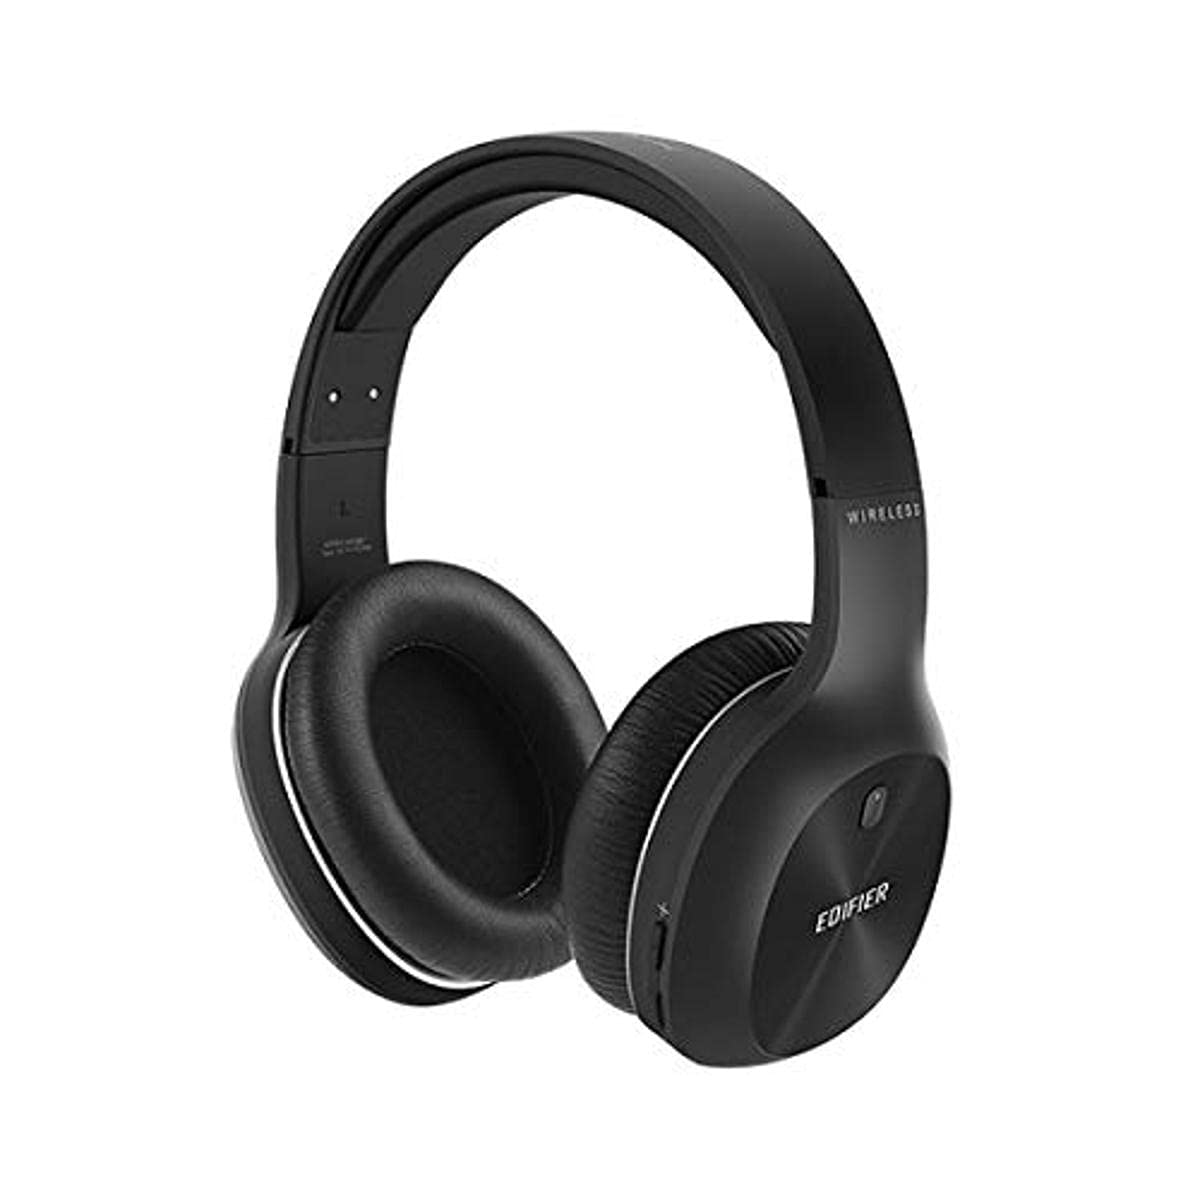 Edifier W800BT Plus Wireless Headphones Over-Ear Headset - Qualcomm aptX - Bluetooth V5.1 - CVC 8.0 Call Noise Cancelling - 55H Playtime - Built-in Microphone - Physical Button and App Control